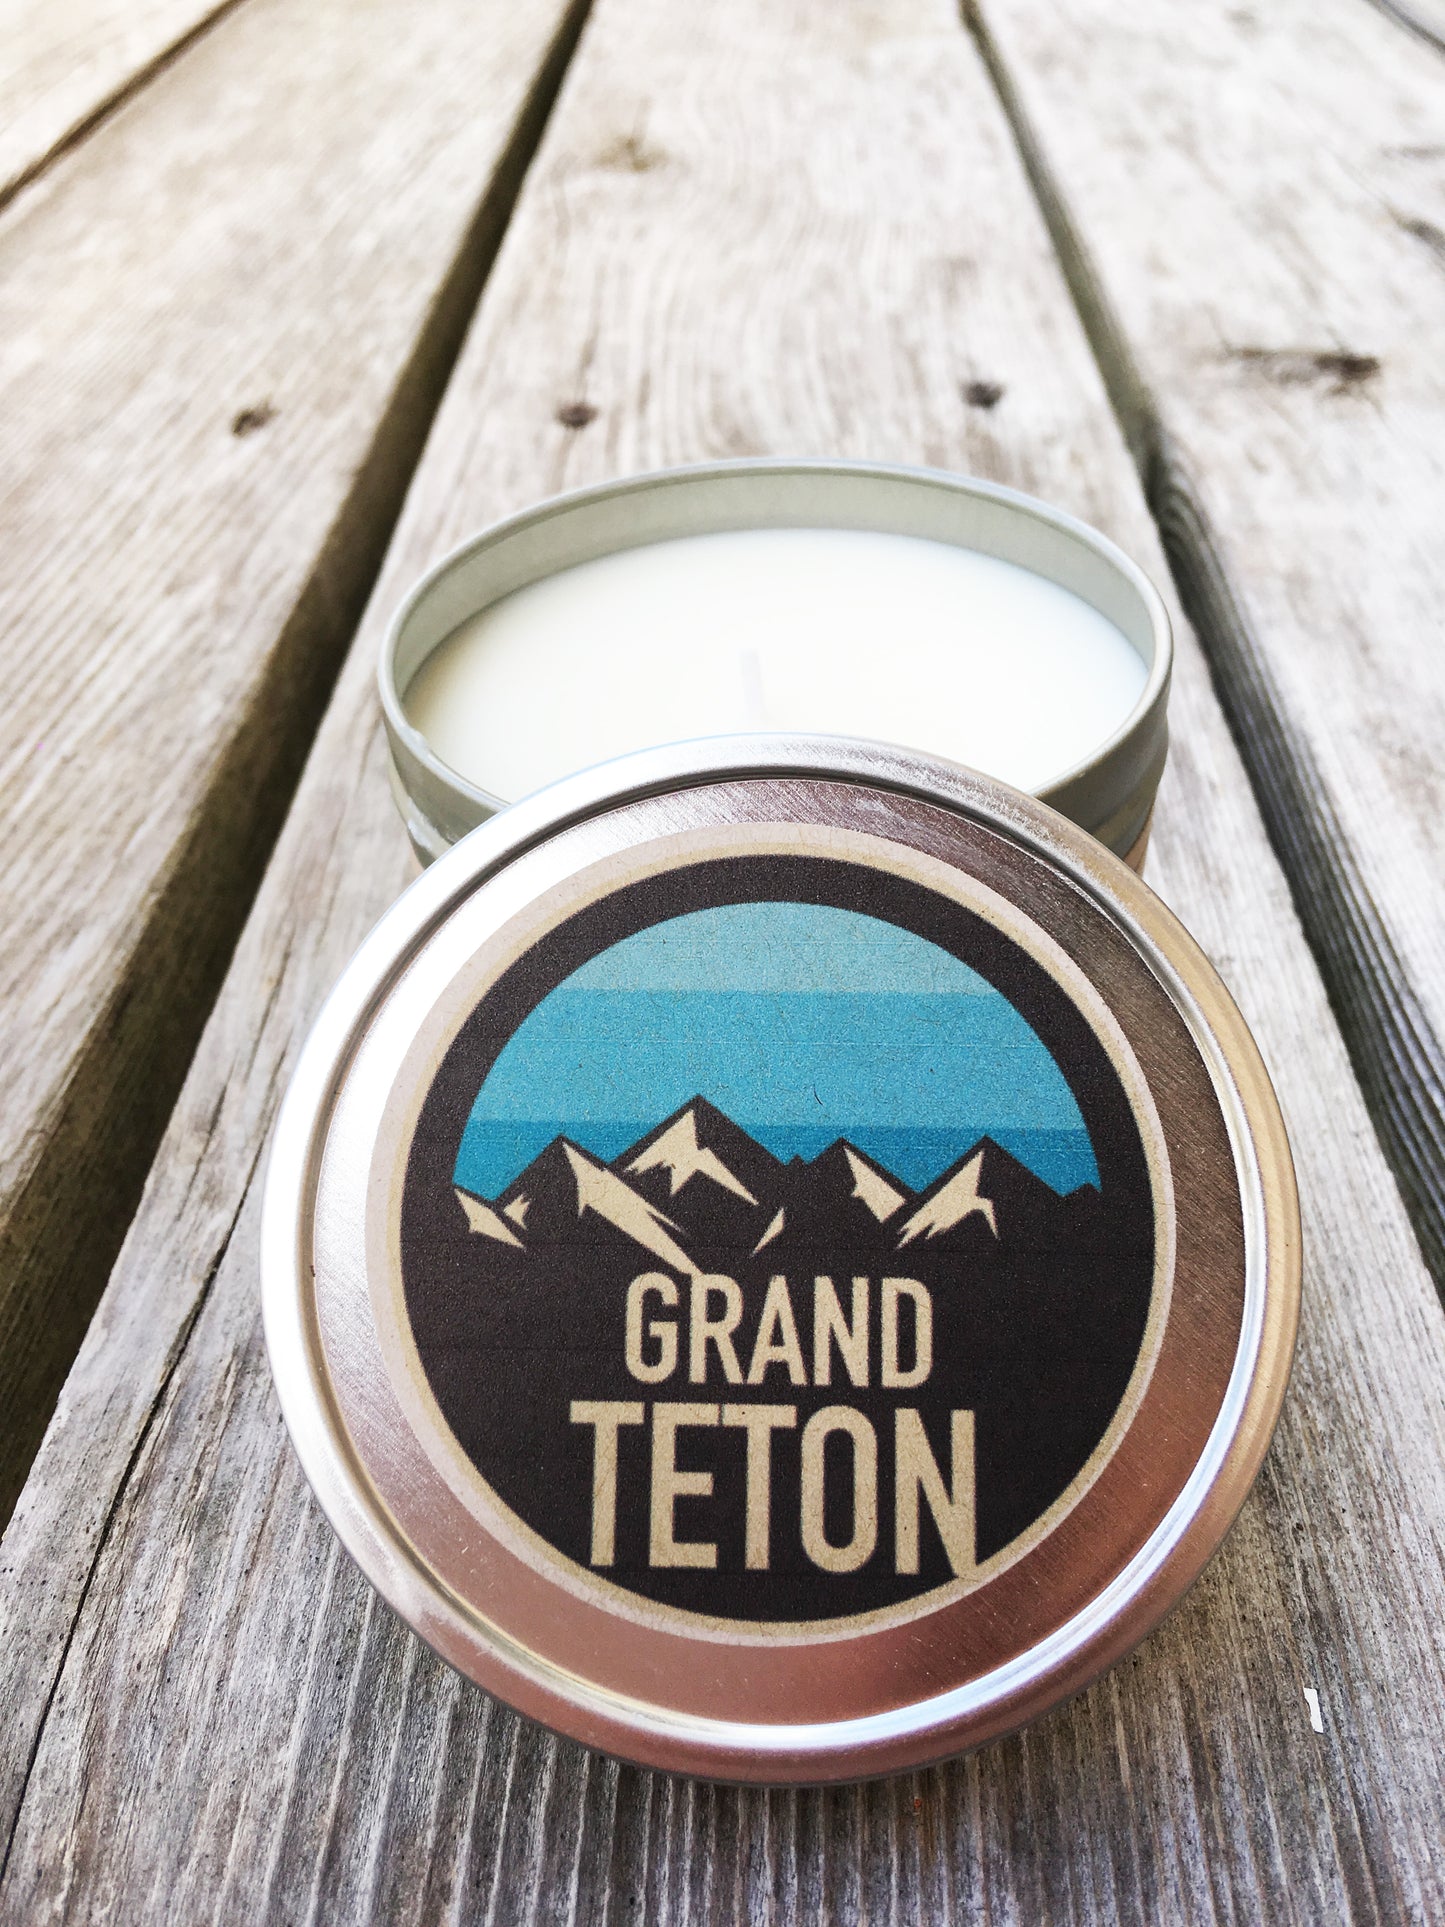 Wander & Co. PARKS COLLECTION "Grand Teton" Candle